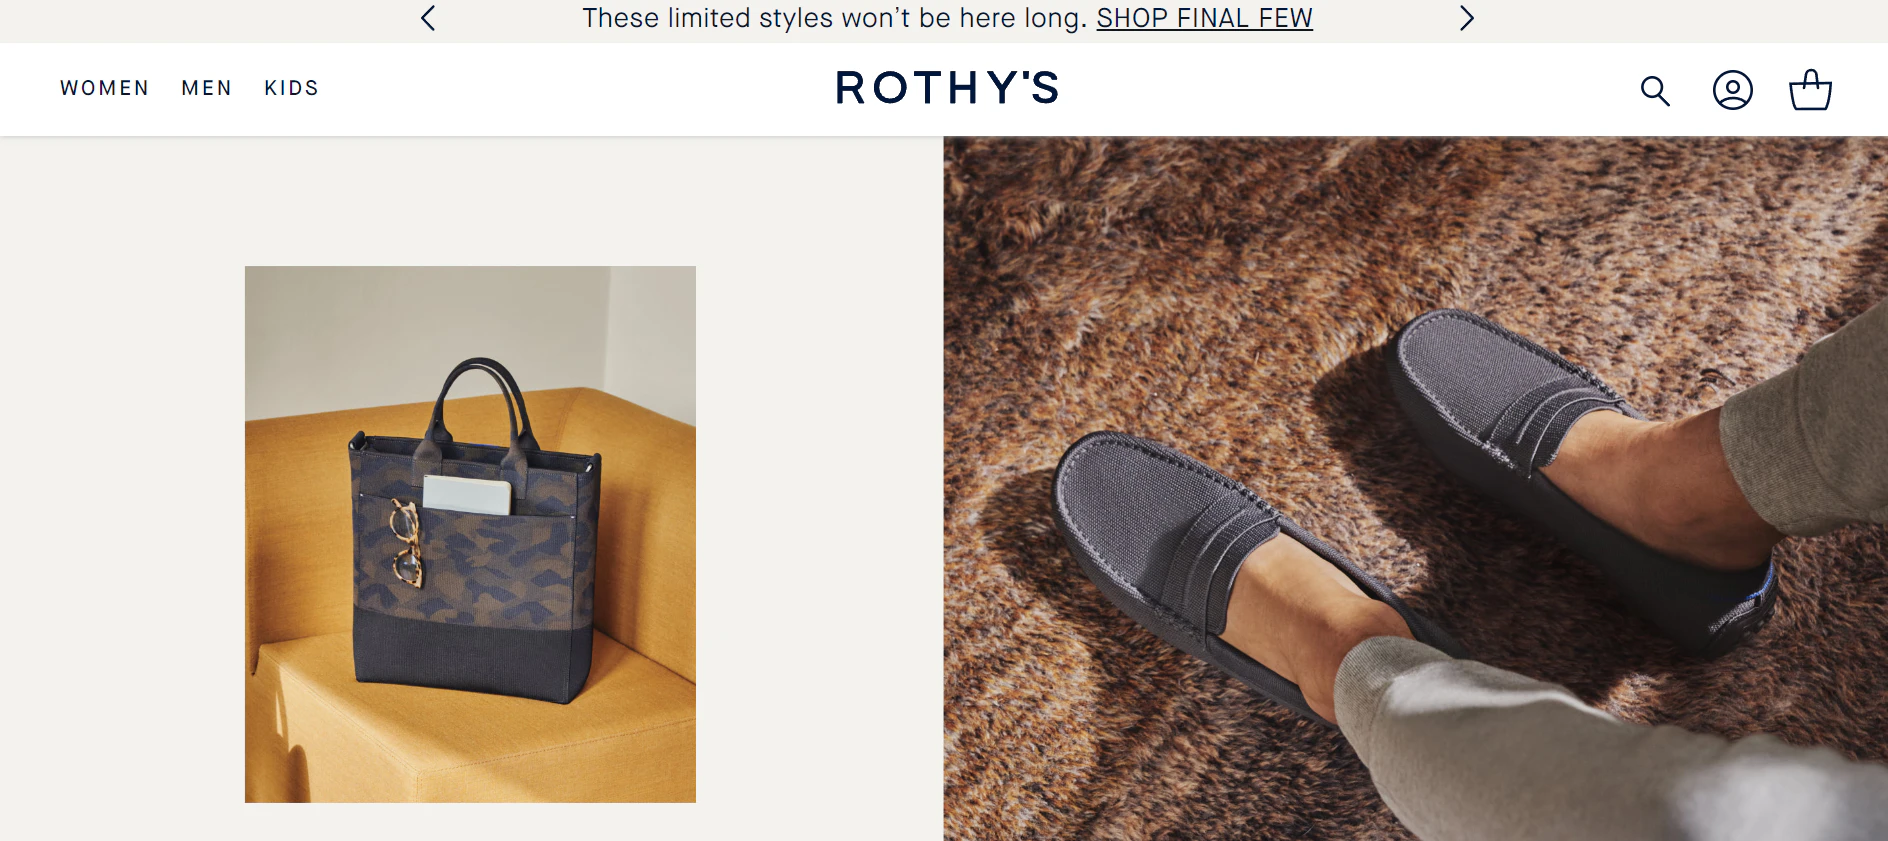 rothy's product image